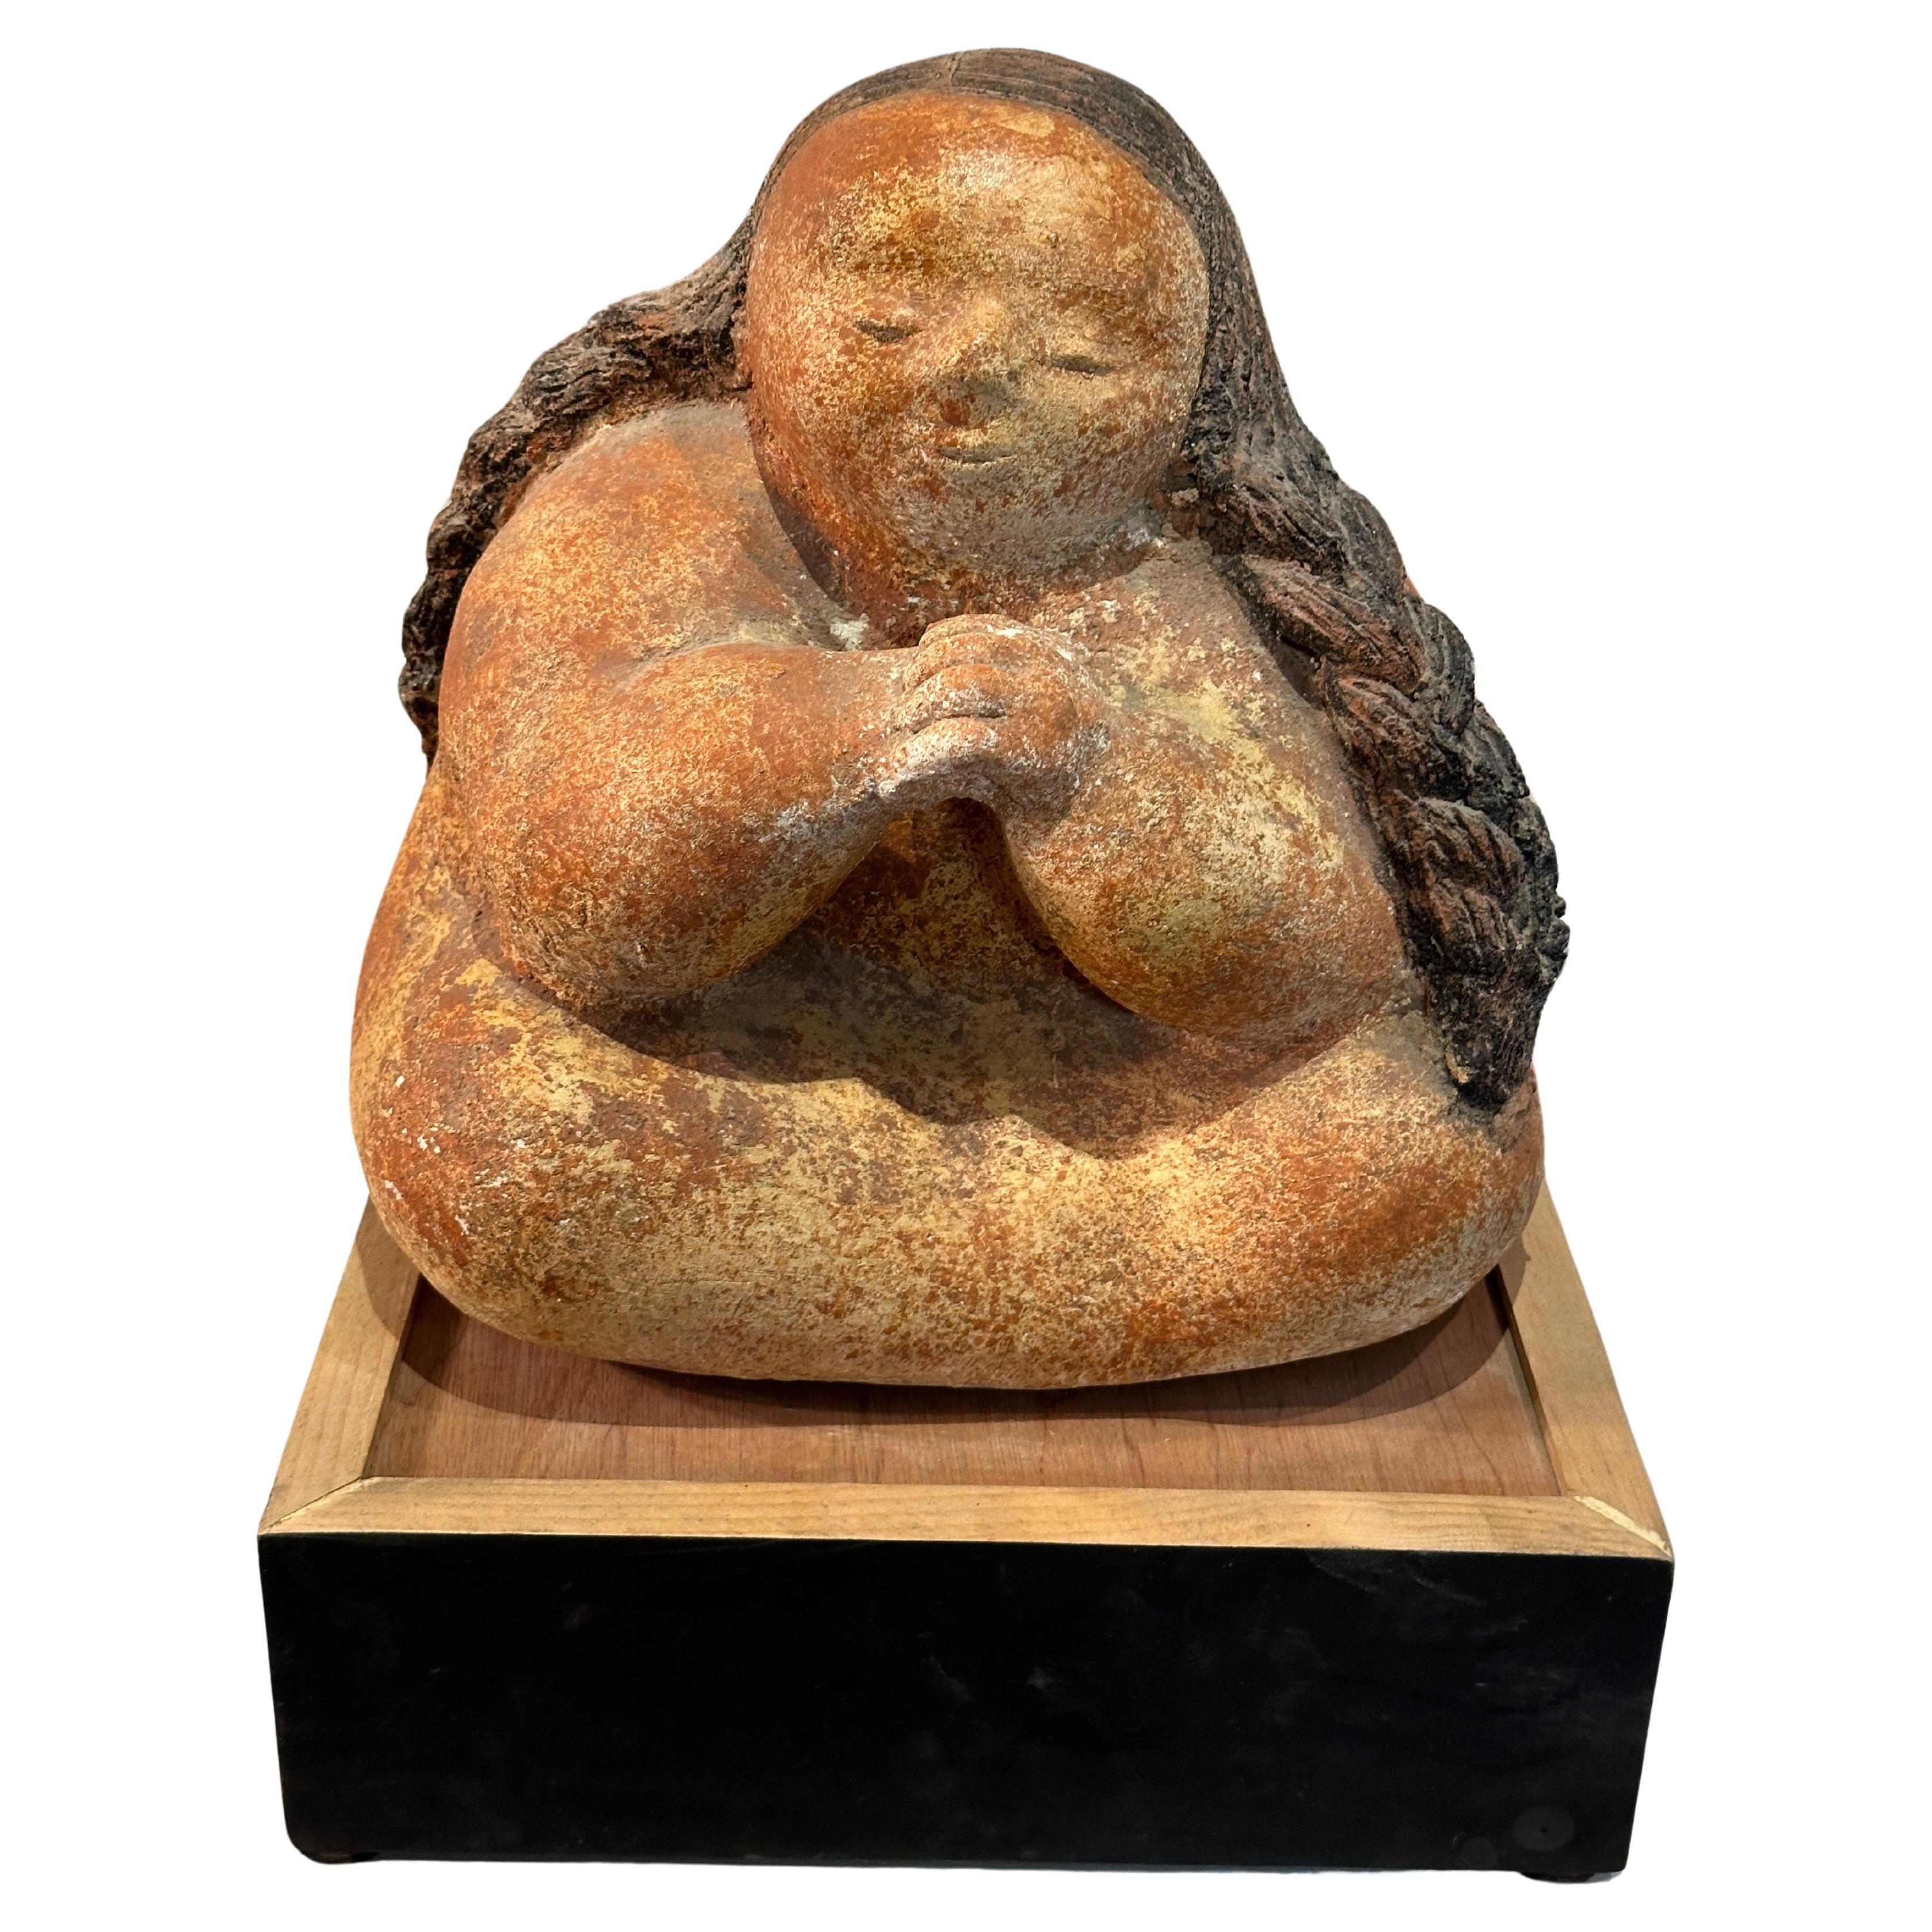  Meditating Girl Statue - Sculpture in Pyrophyllite Patinated Stone For Sale